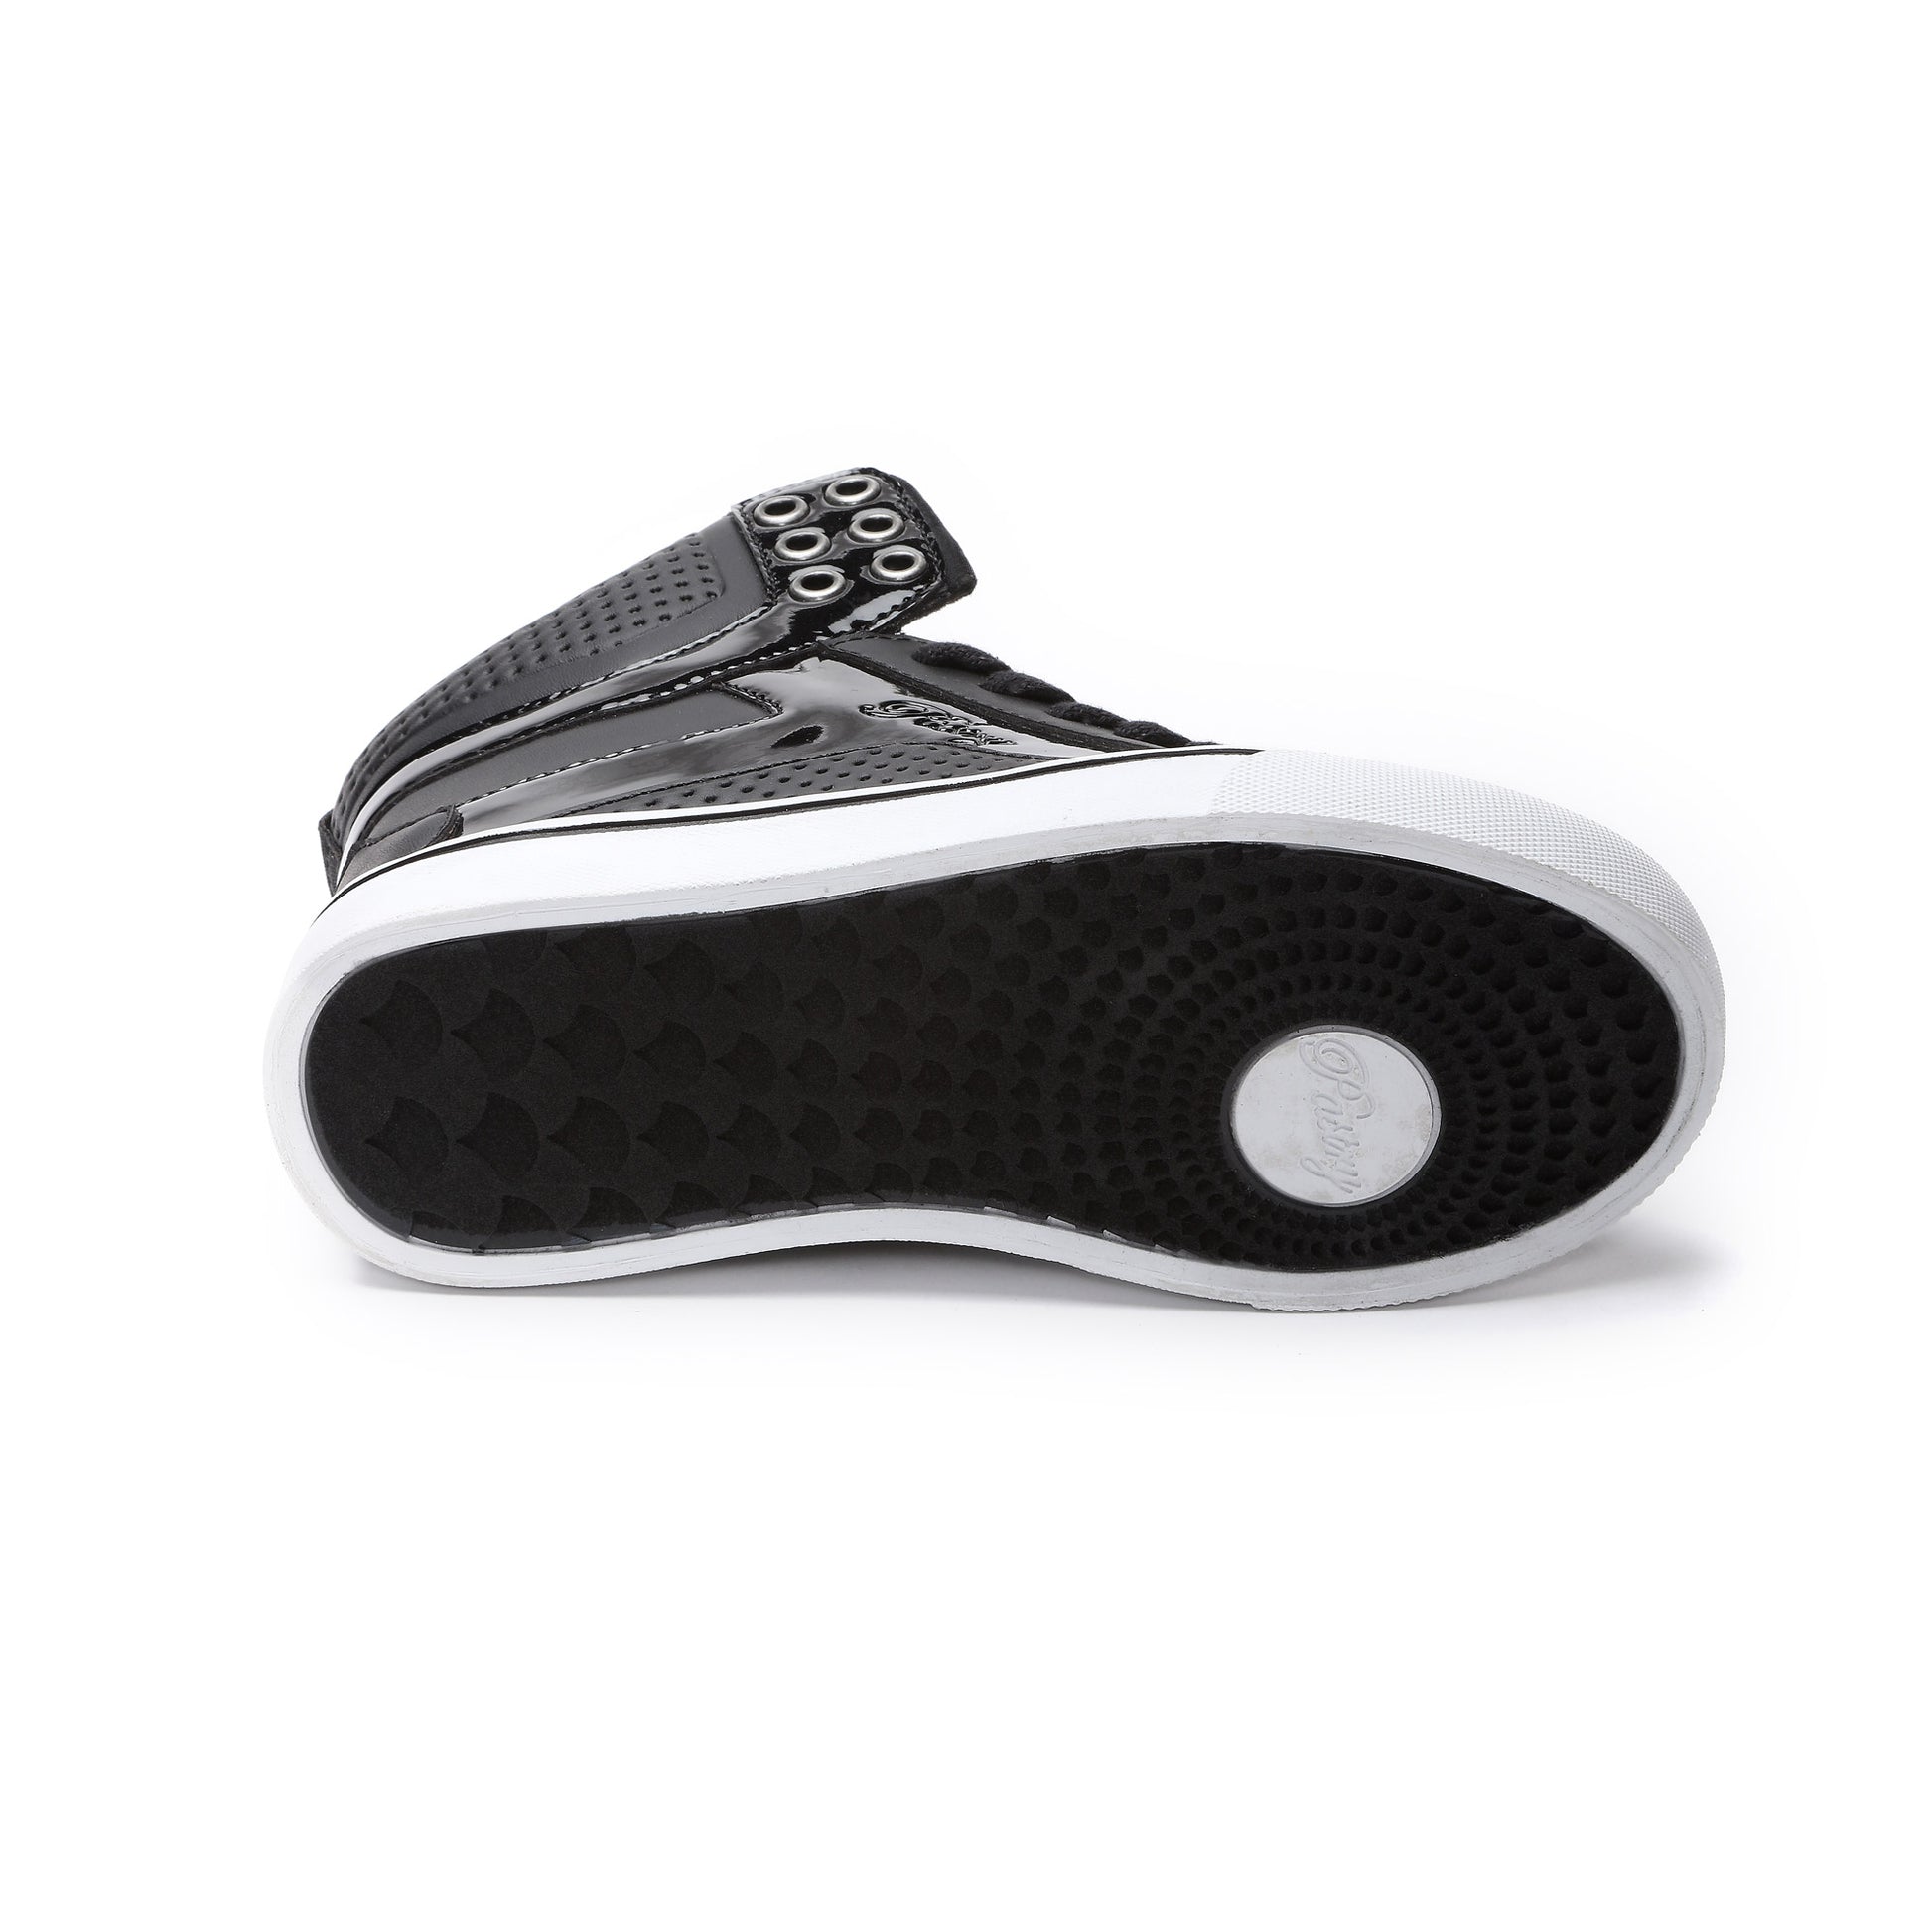 Pastry Pop Tart 2.0 Youth Sneaker in Black/White outsole view